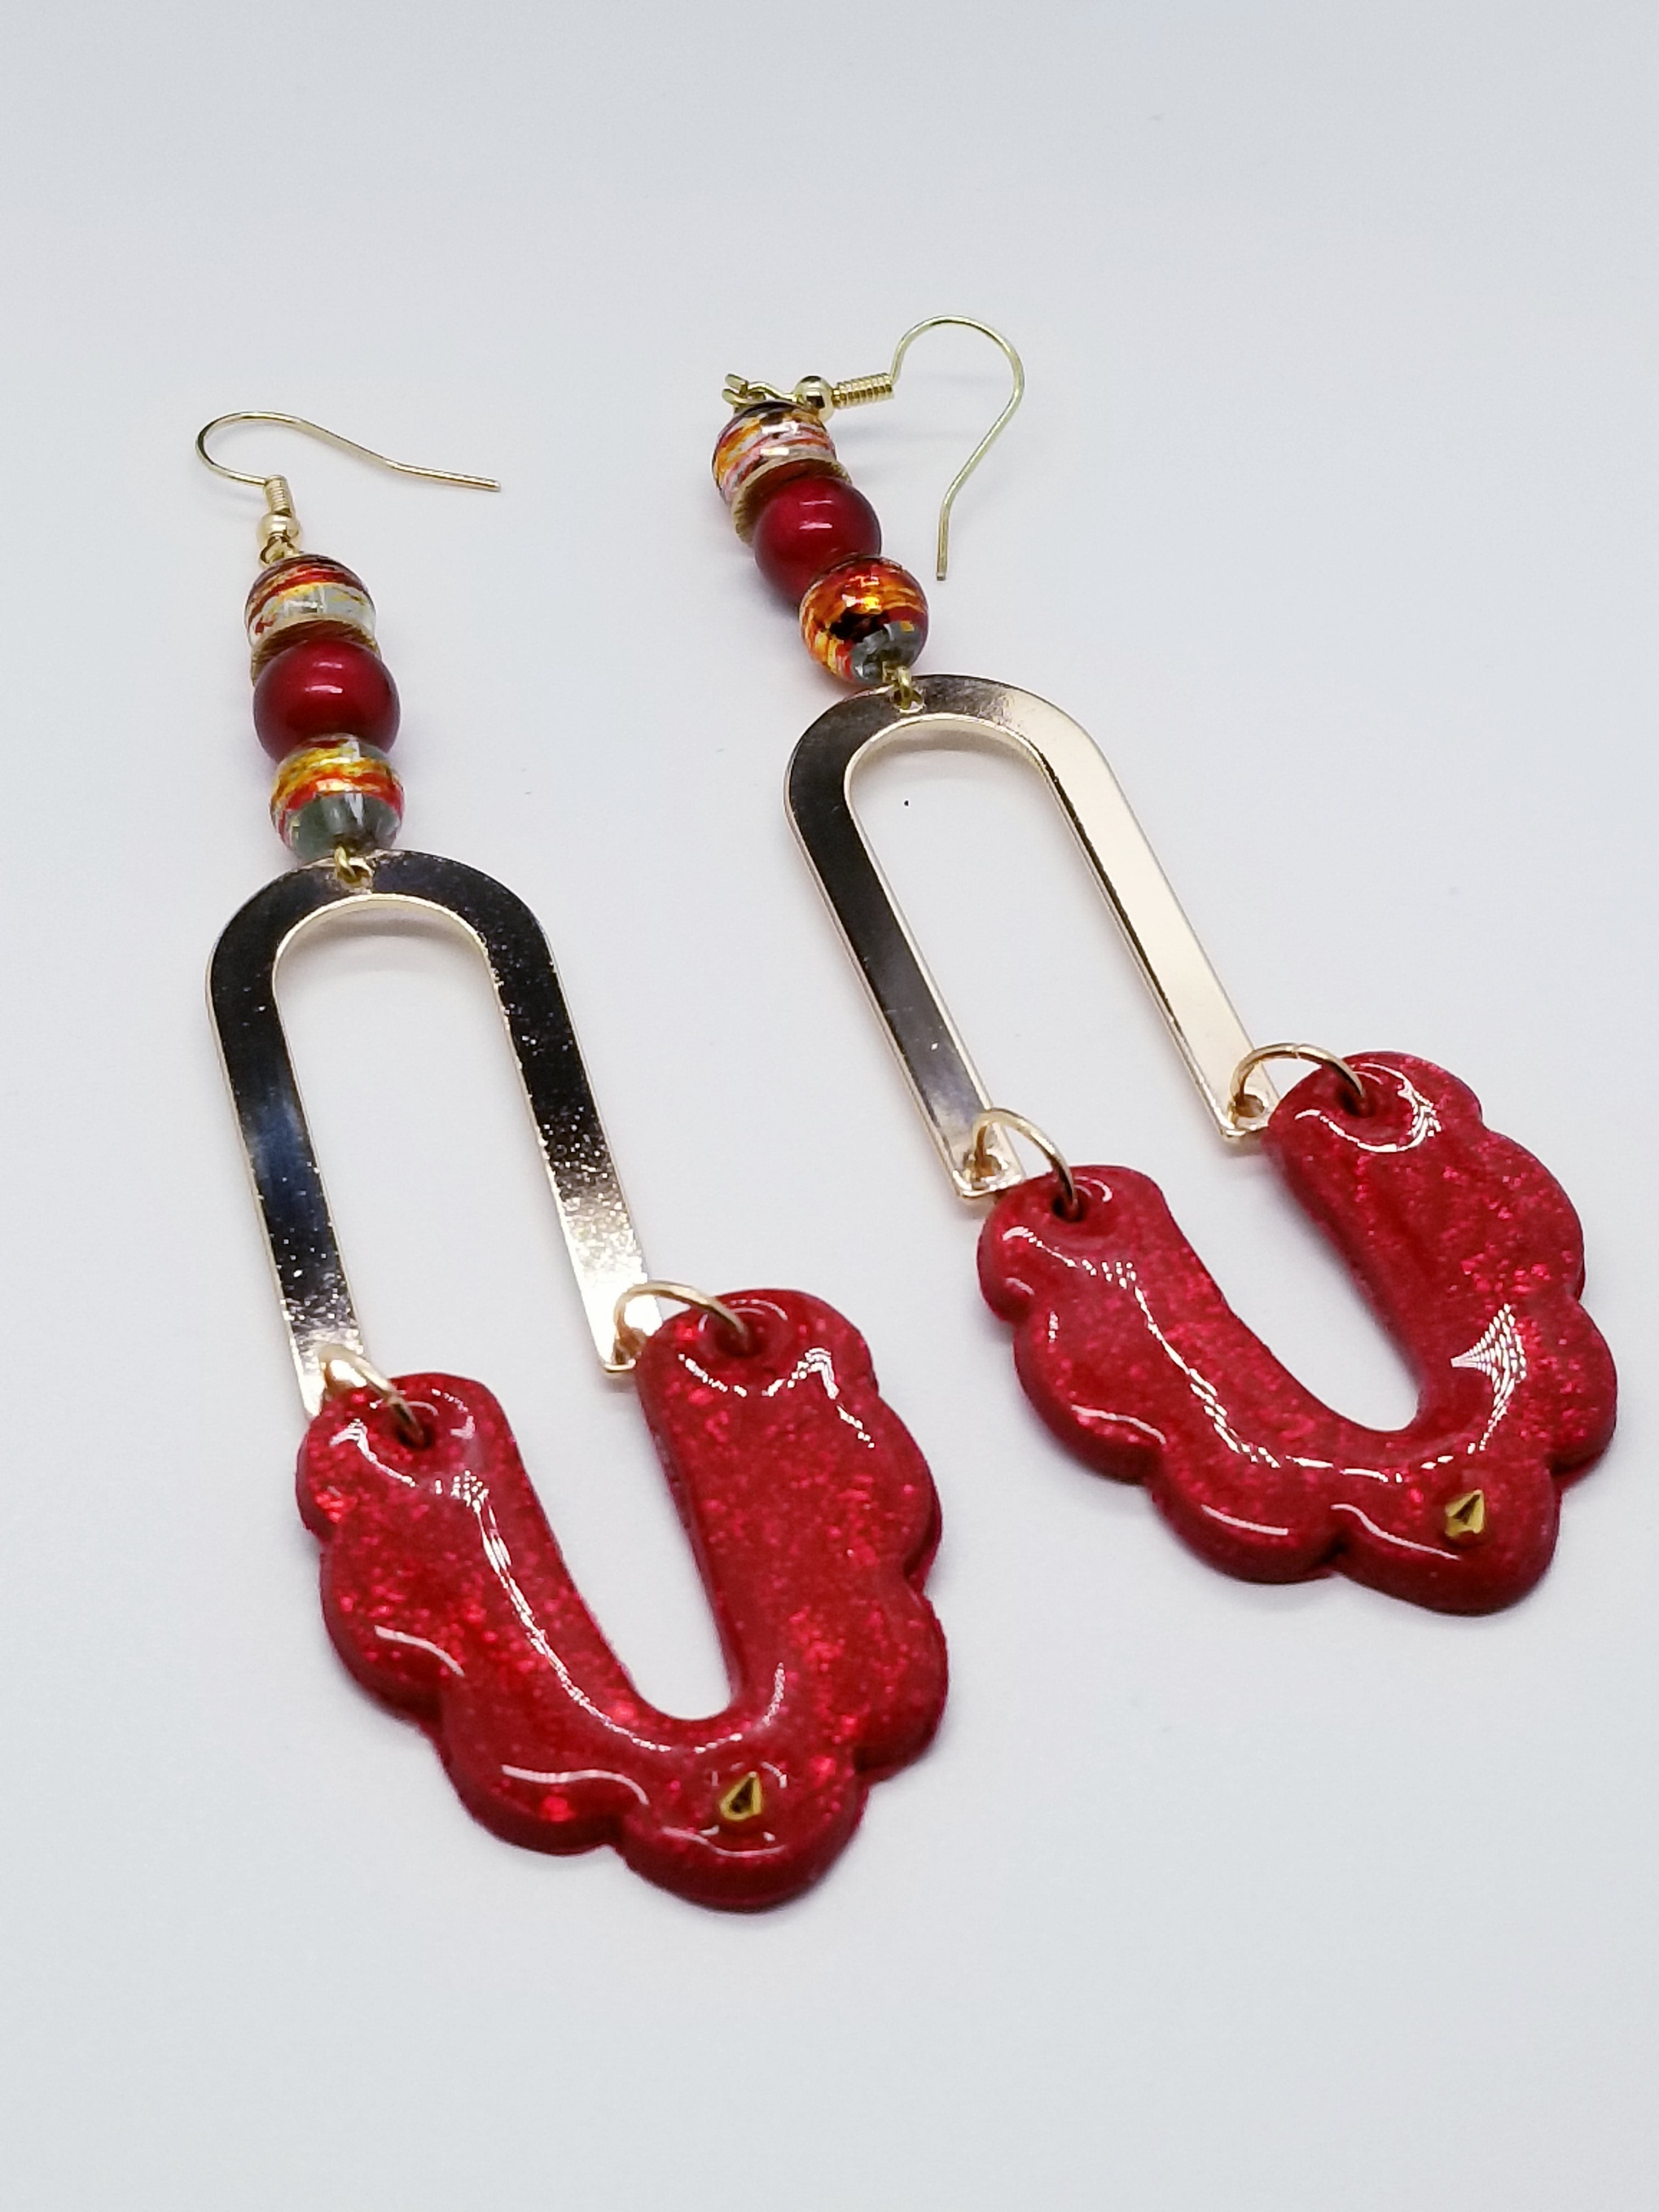 Length: 4.5 inches | Weight: 0.6 ounces  Designed just for you! The earrings are handmade using   red glitter swirl polymer clay scalloped design with resin overlay, gold u-shaped charm, 8mm red and gold swirl glass beads, 8mm red opaque glass beads, gold spikes, gold rondelle spacers, gold head pins, and hypoallergenic hooks with back closures. 